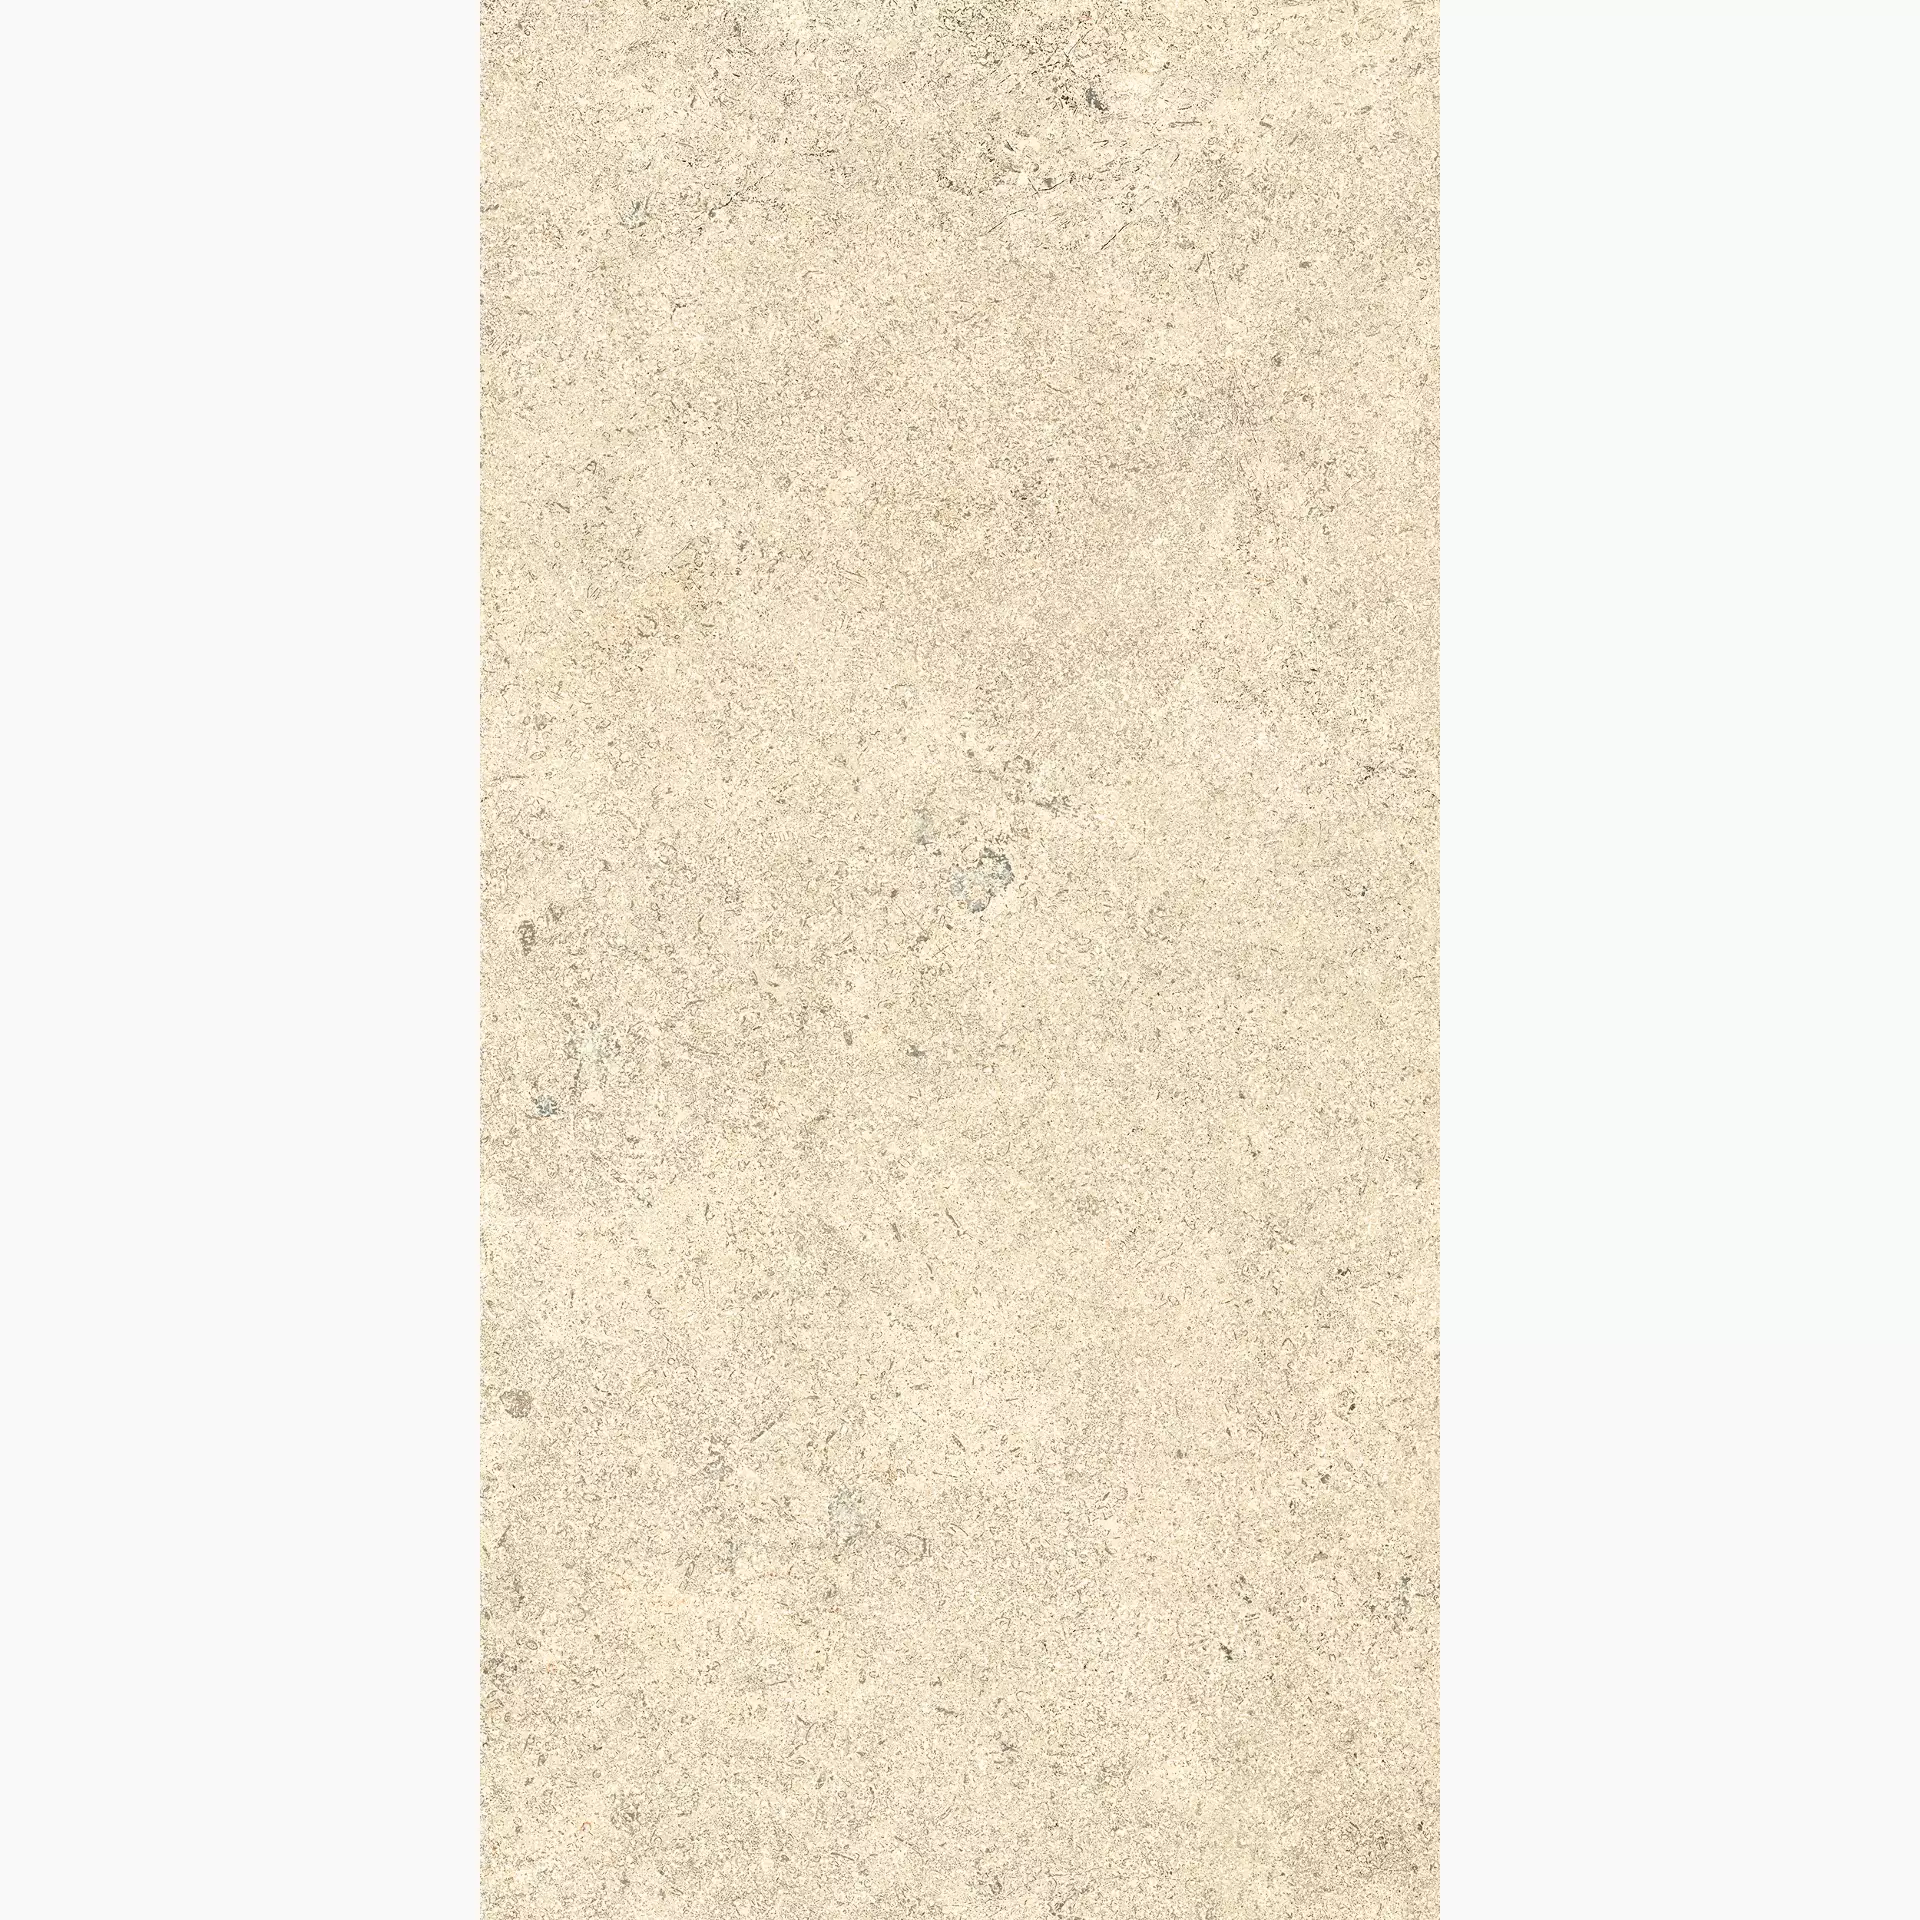 Cottodeste Pura Ivory Rolled Protect EG-PR15 30x60cm rectified 14mm